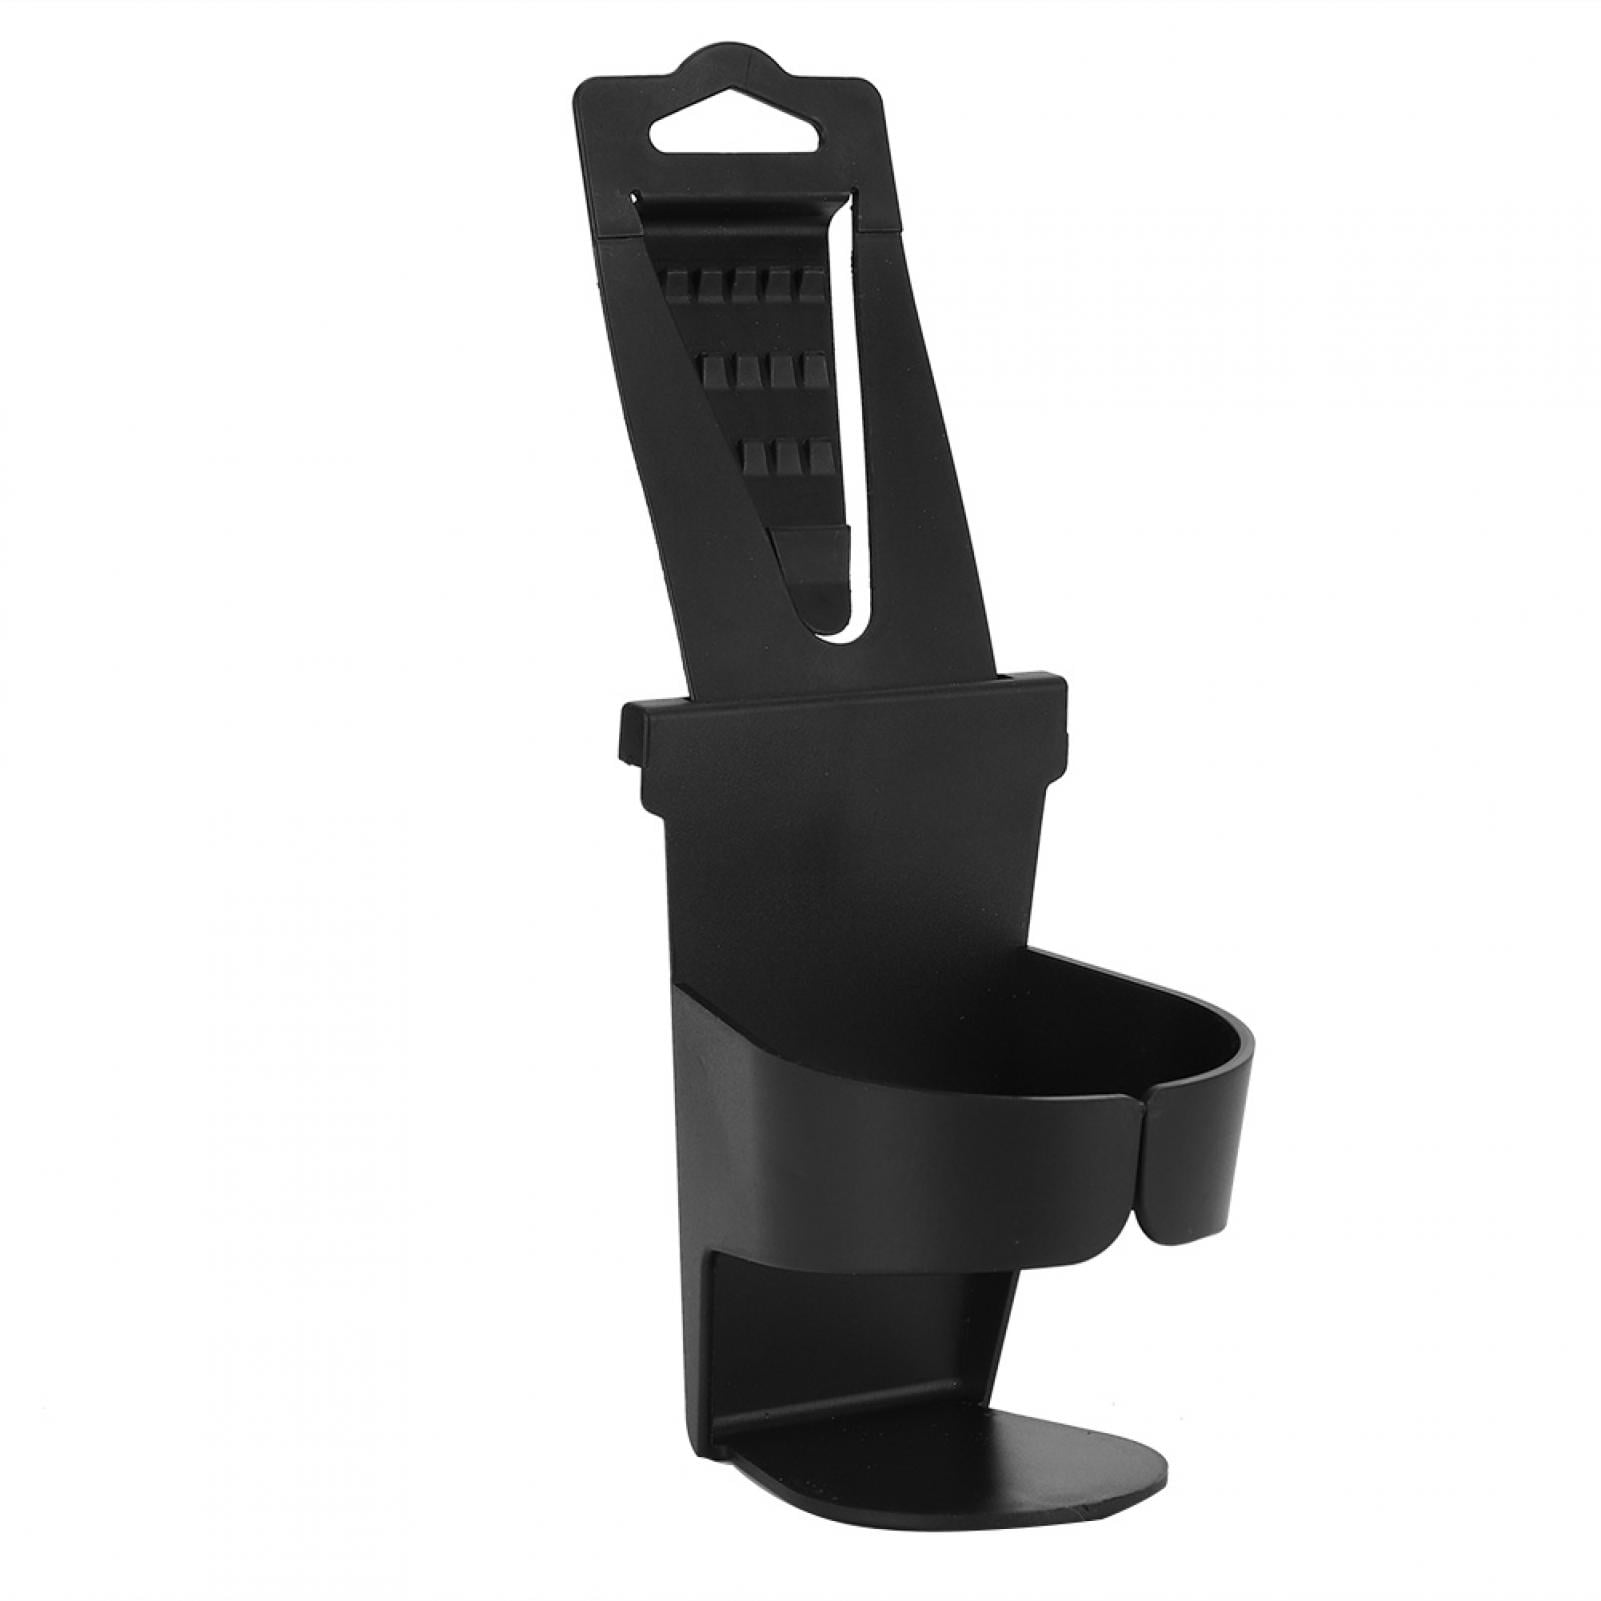 Mgaxyff Drink Holder,Mobility Scooter Wheelchair Universal Water